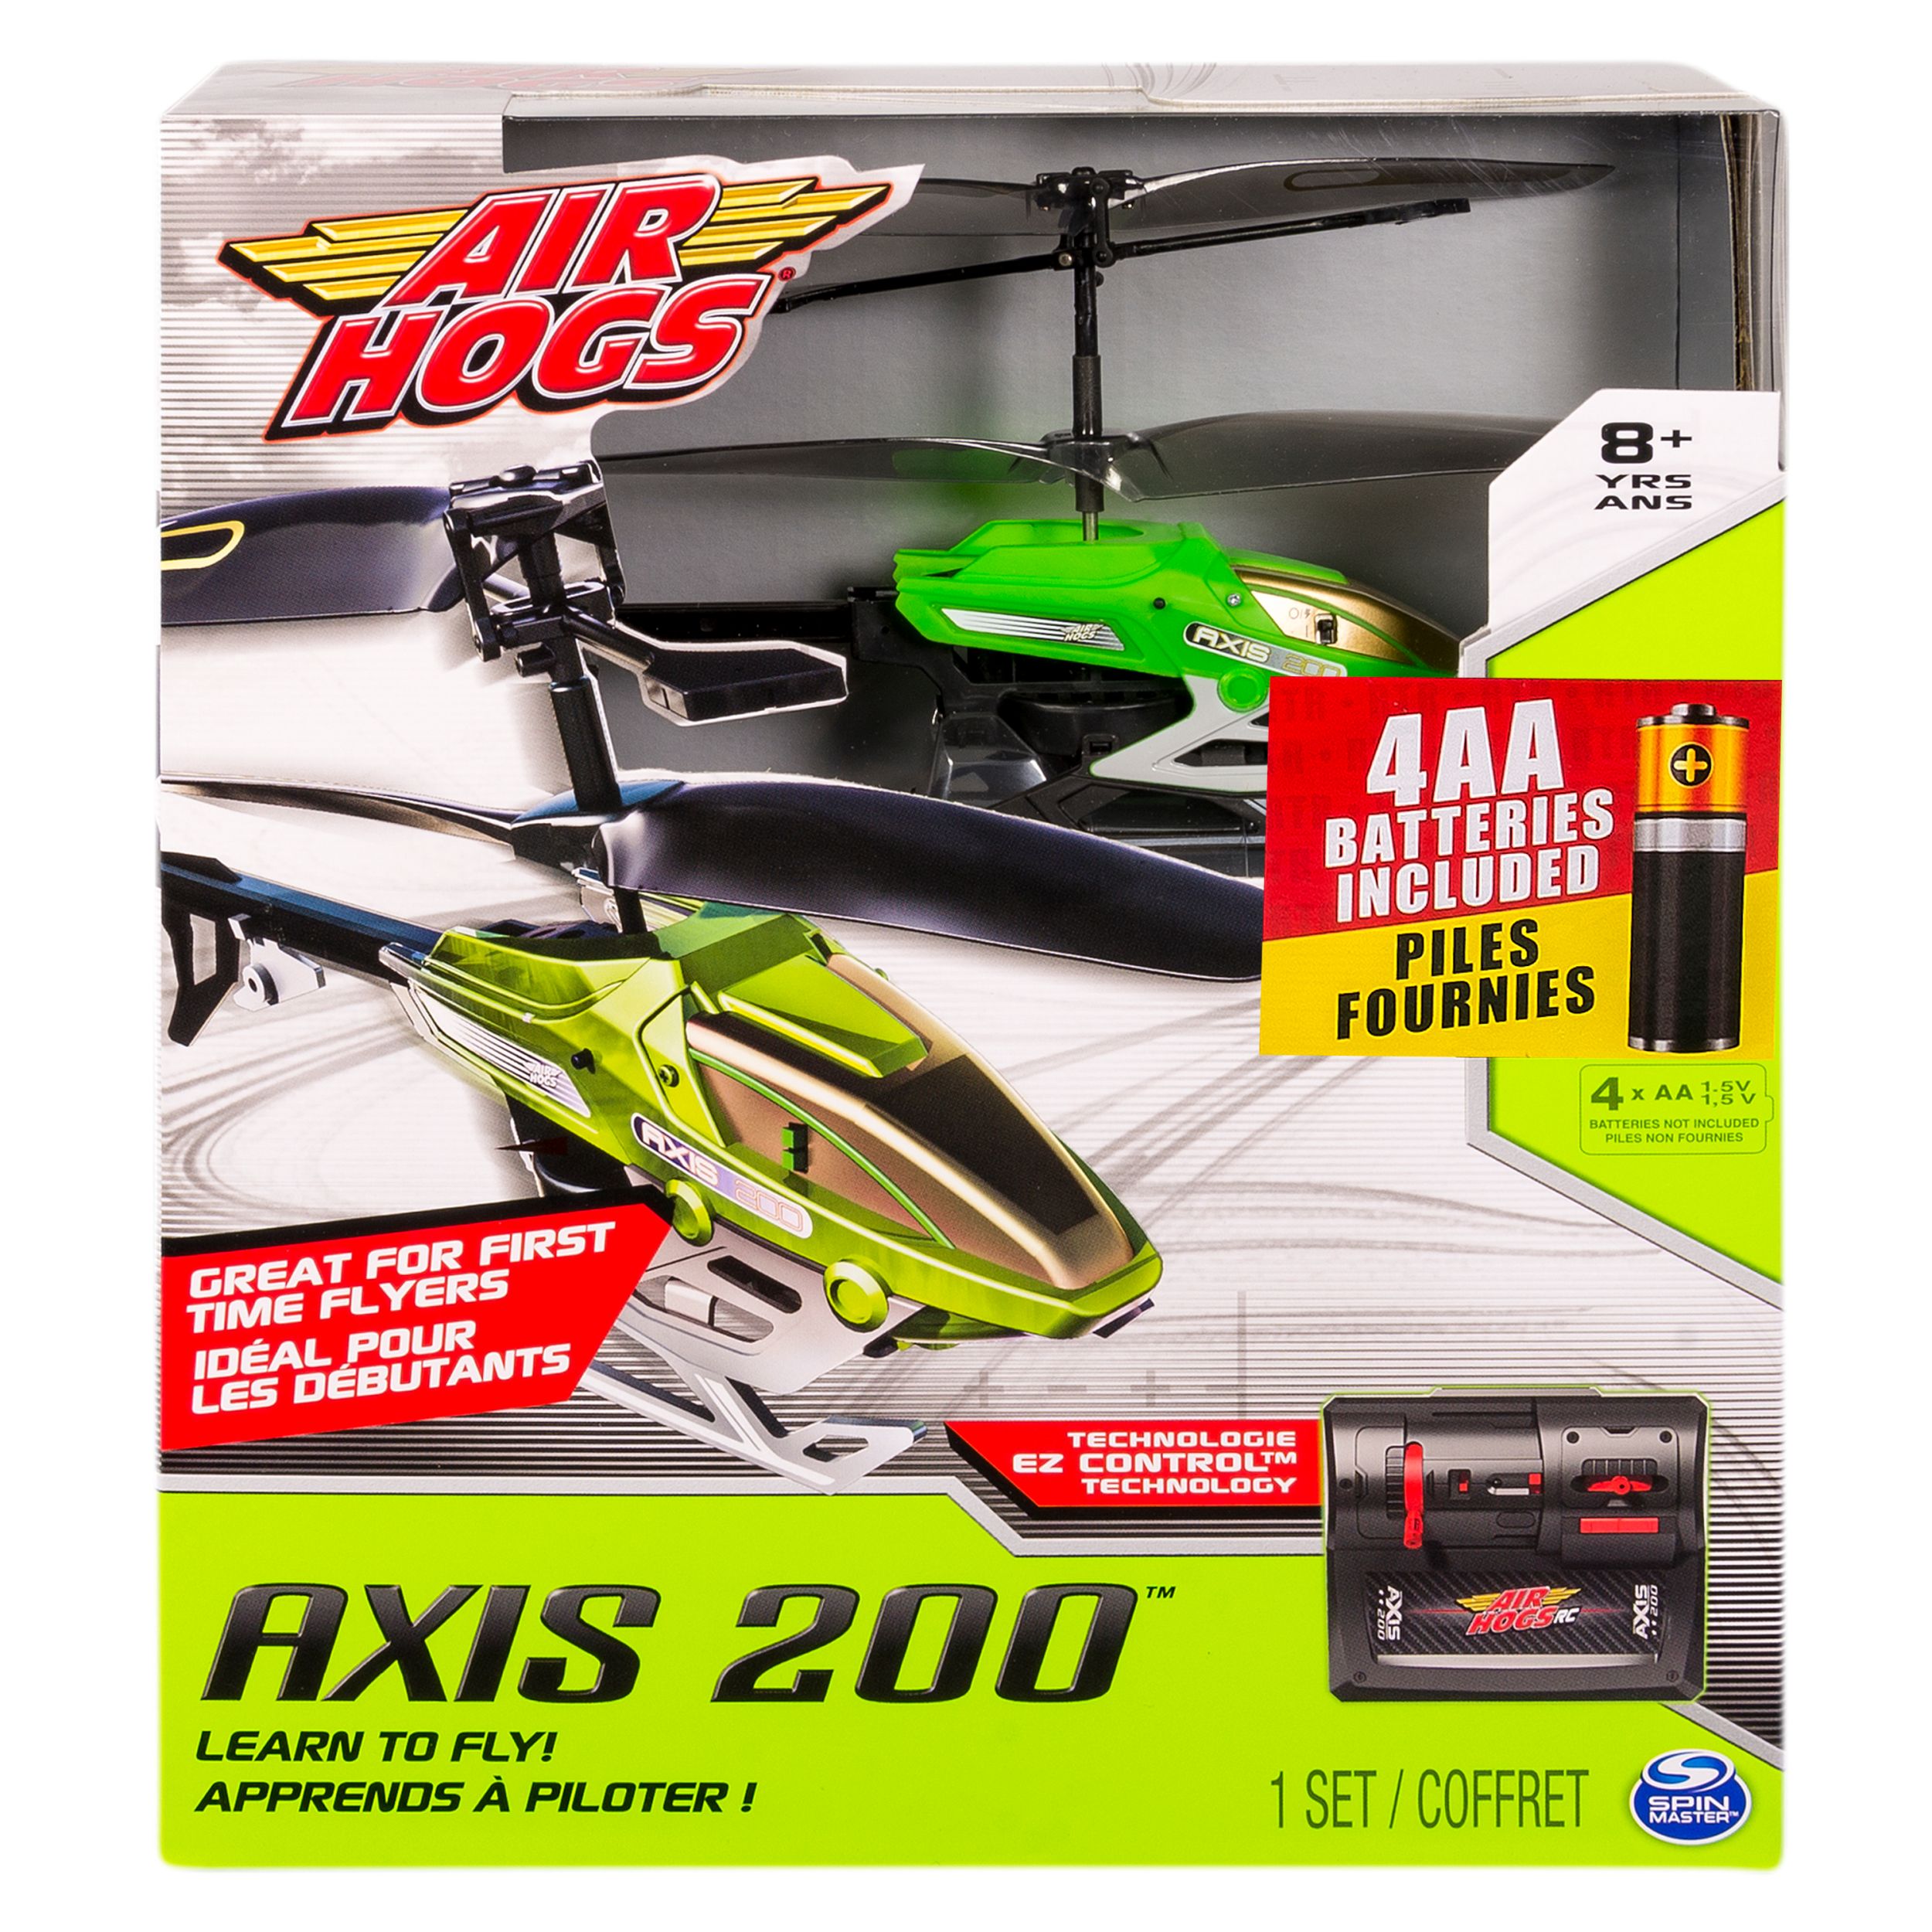 Air Hogs Axis 200 R/C Helicopter with Batteries, Green - image 2 of 6